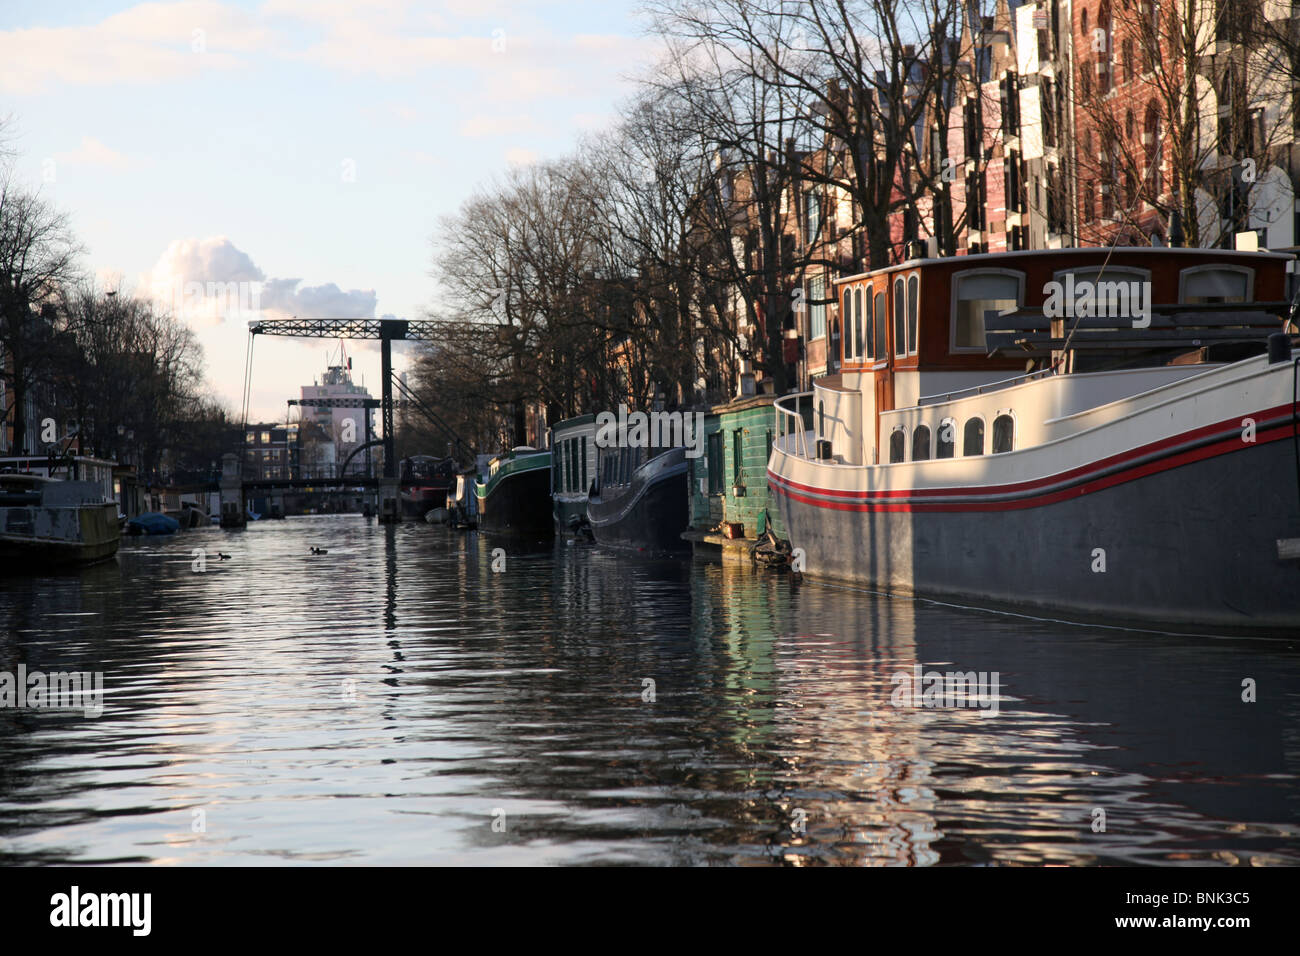 Canal and house boats in Amsterdam Stock Photo